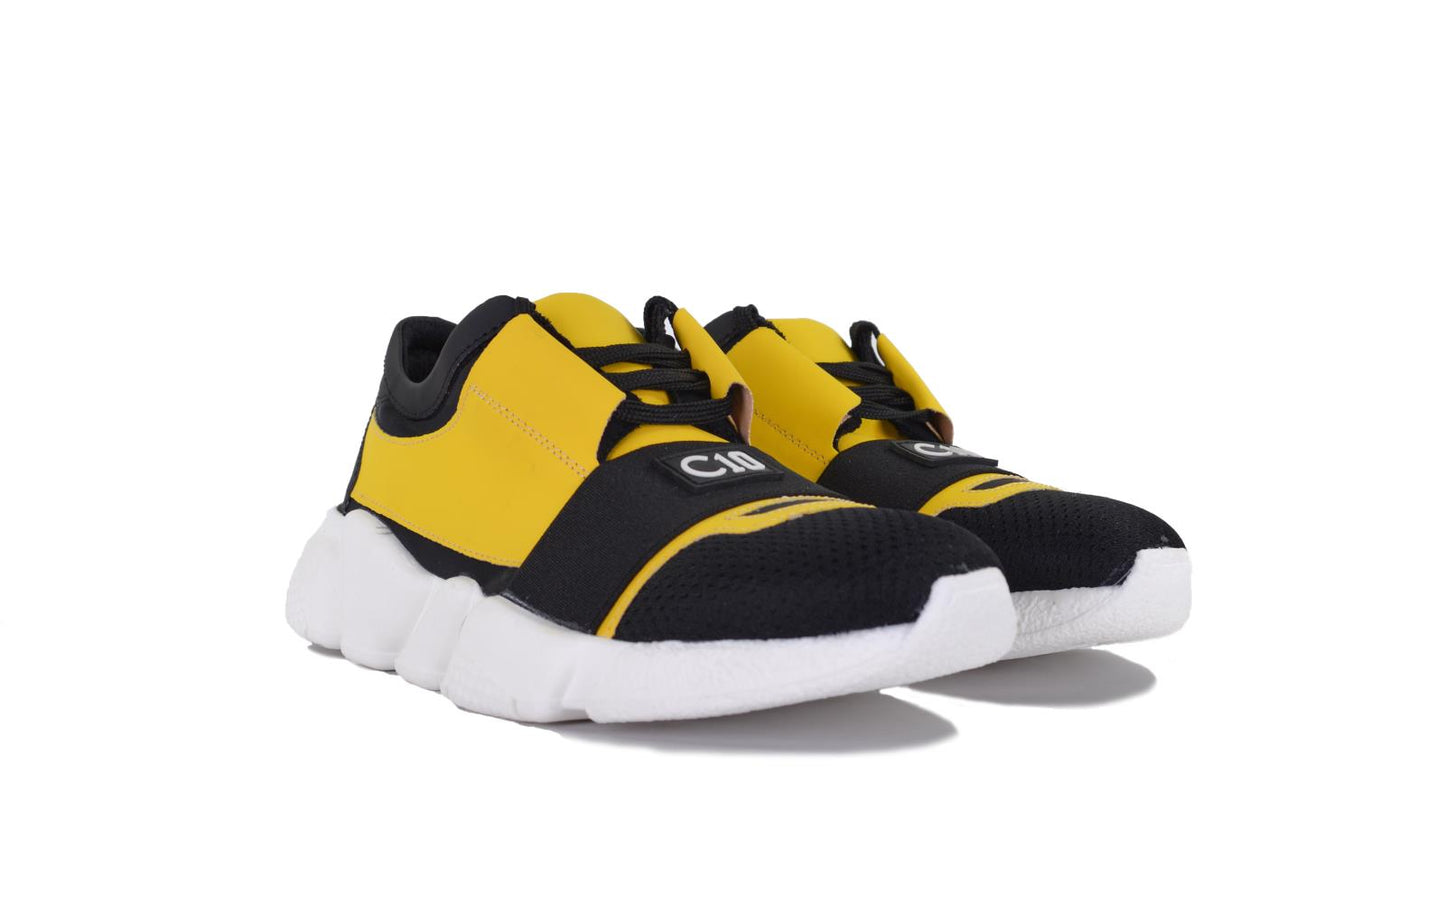 Sneakers gommata - SP400GM